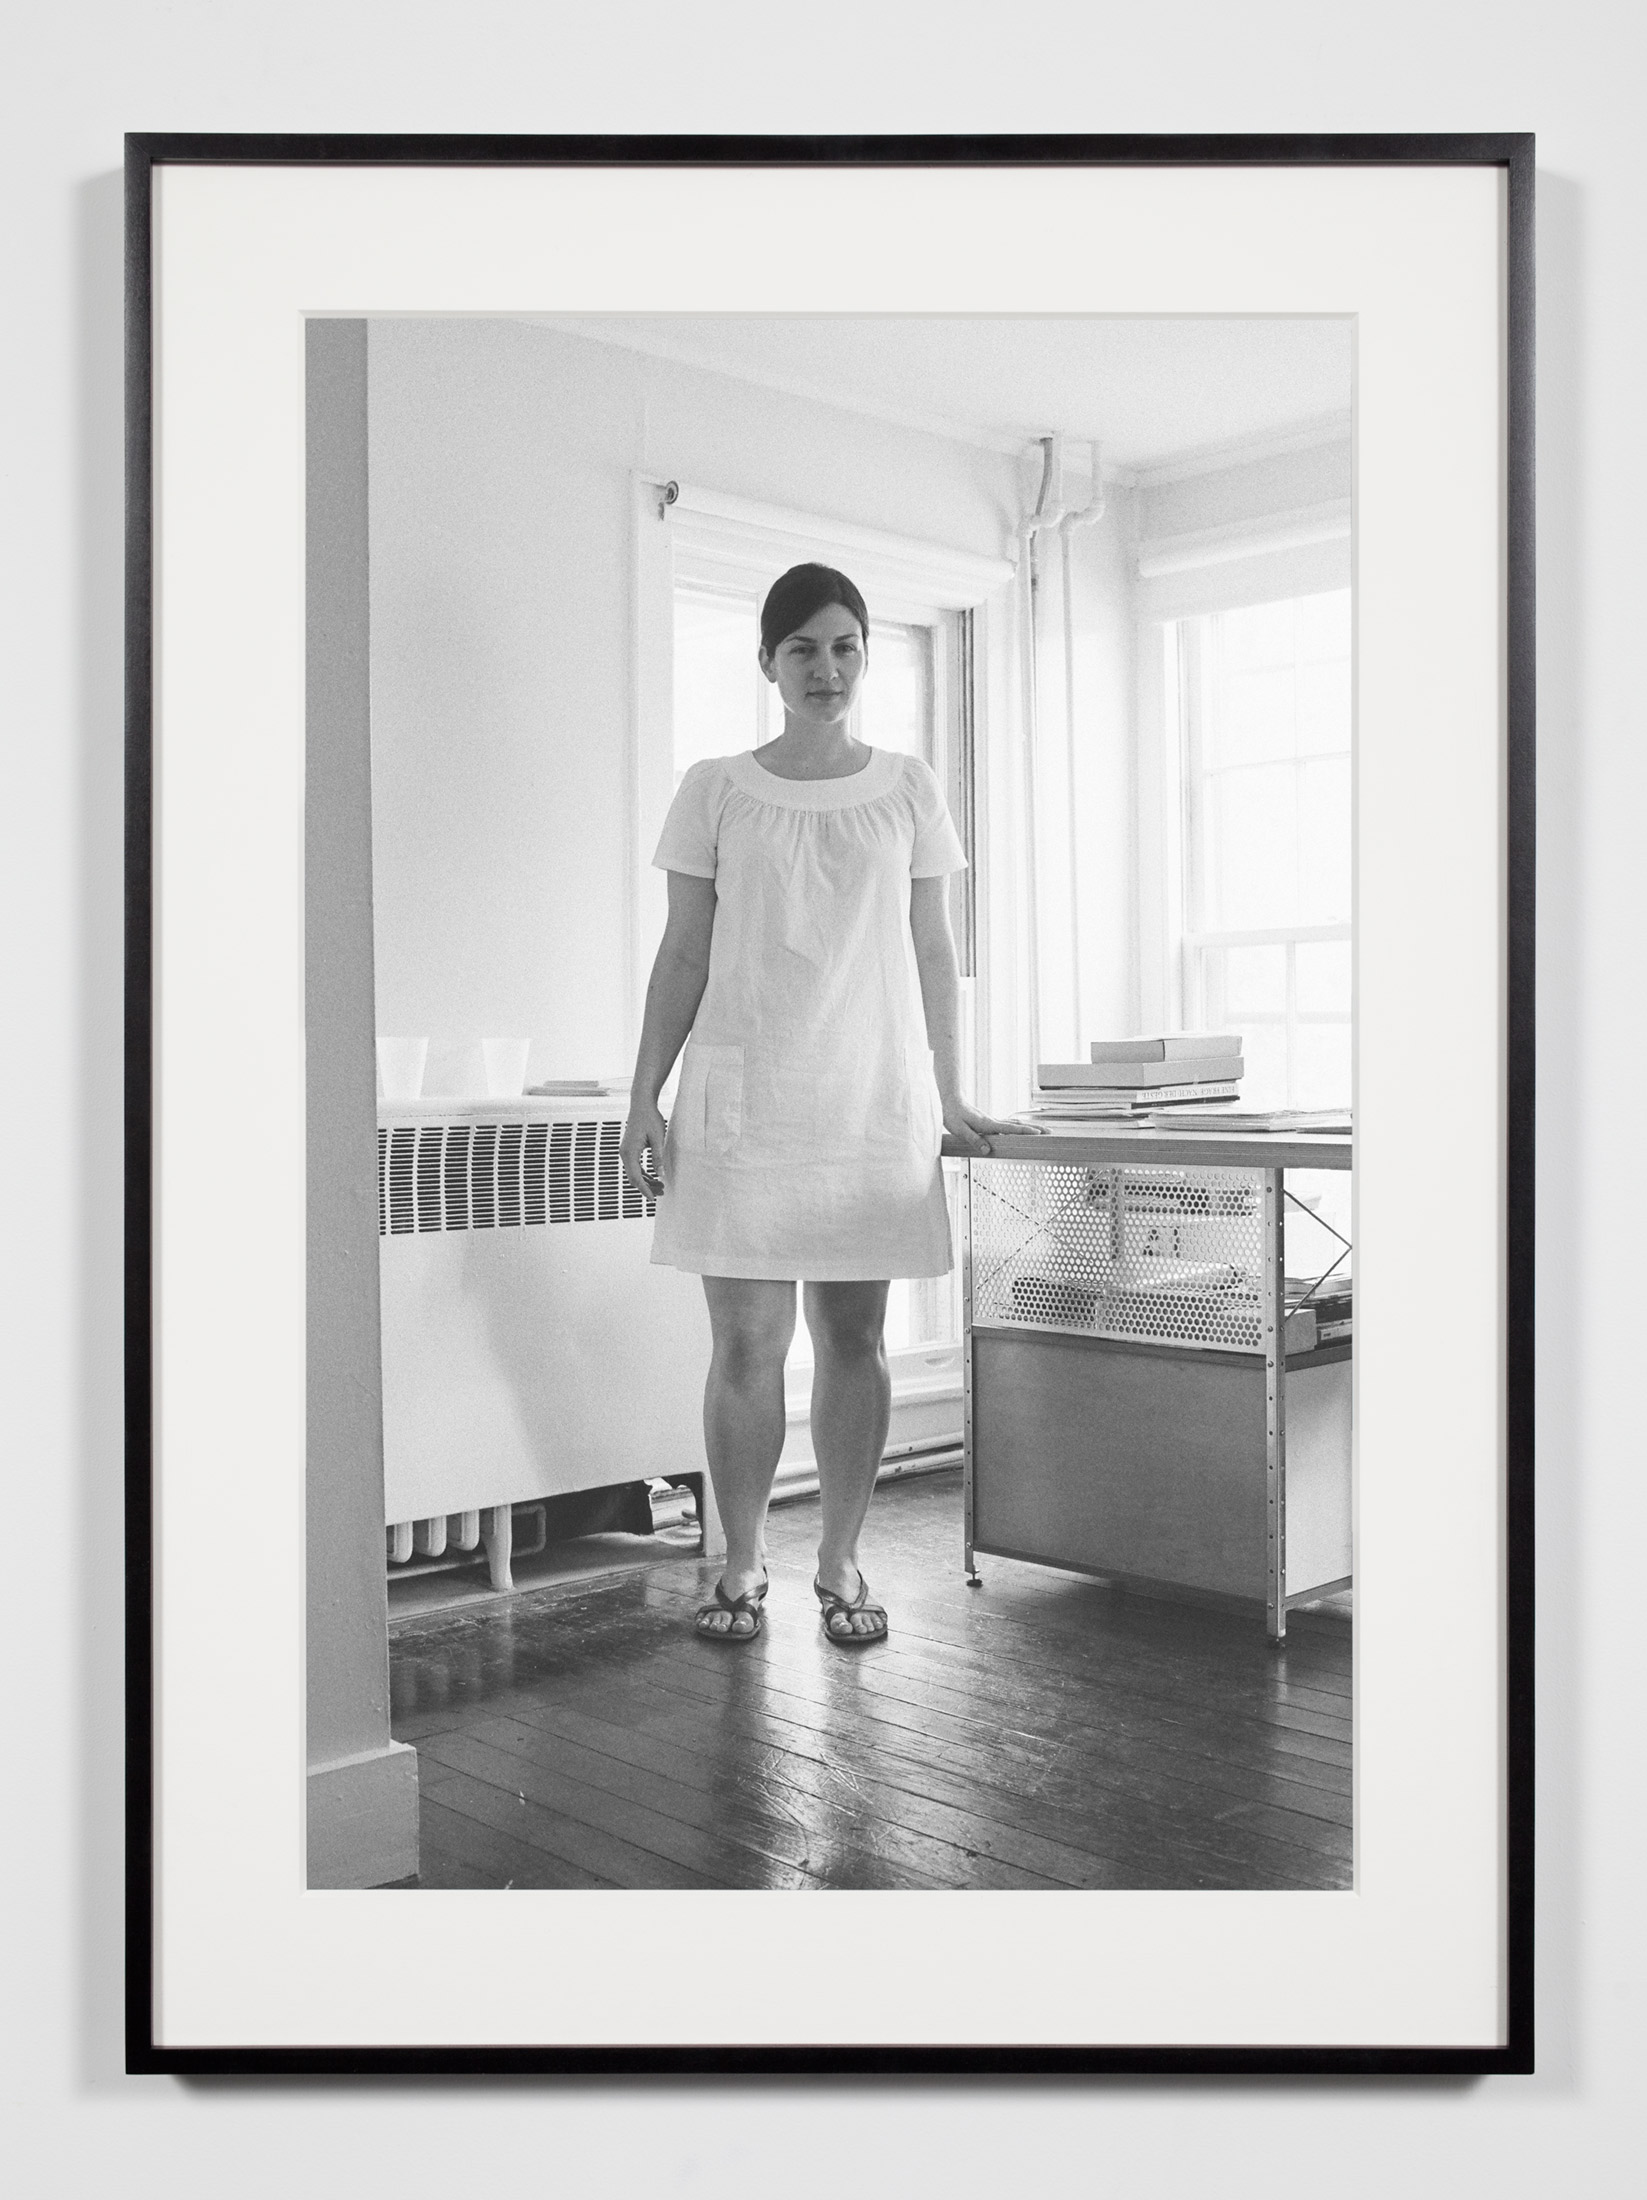   Nonprofit Executive Director/Magazine Publisher and Editor, Annandale-on-Hudson, New York, July 11, 2009   2011  Epson Ultrachrome K3 archival ink jet print on Hahnemühle Photo Rag paper  36 3/8 x 26 3/8 inches   Industrial Portraits, 2008–    A Di